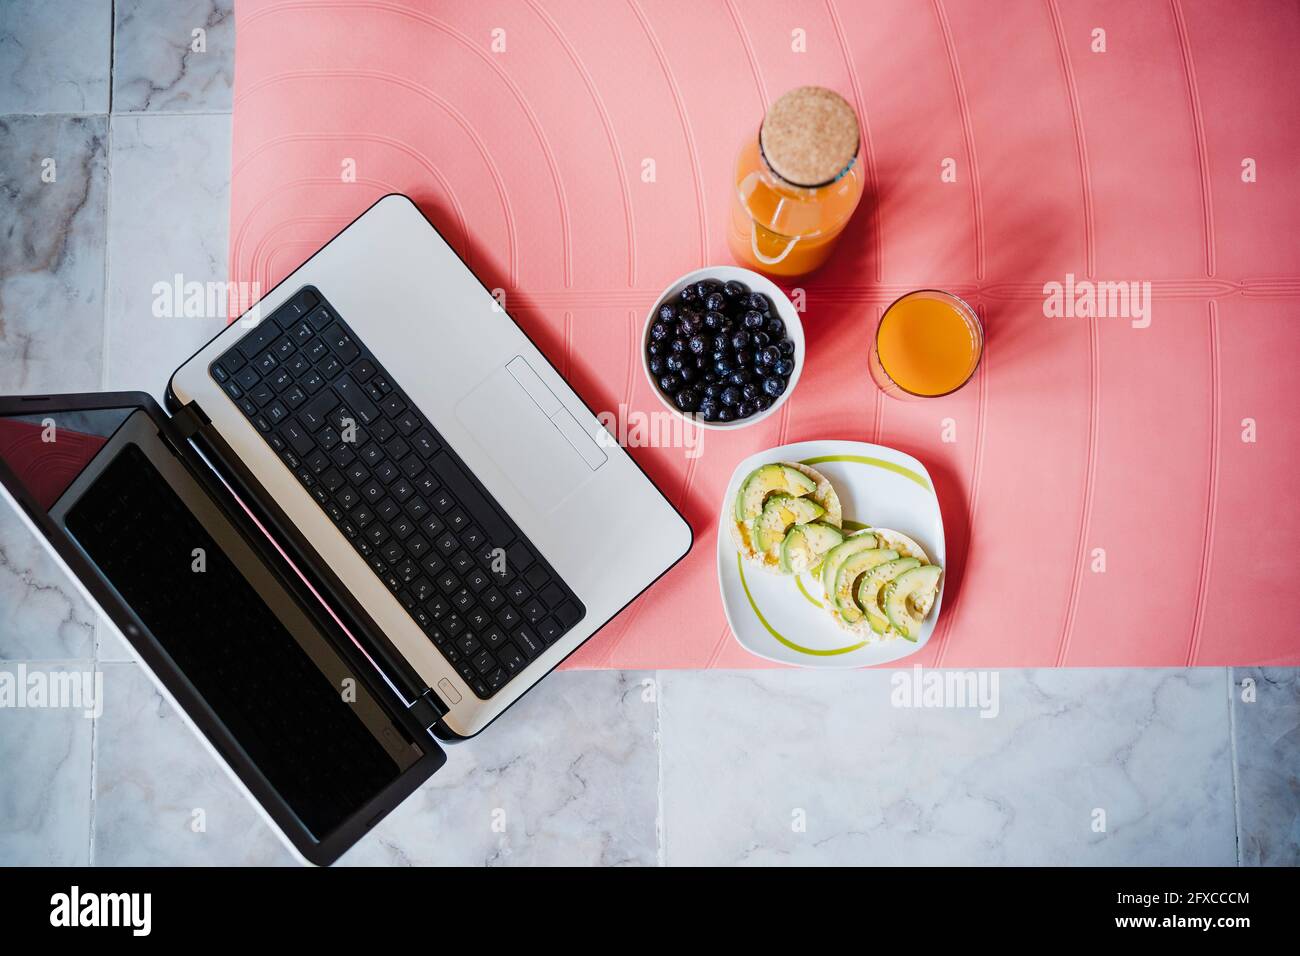 Laptop and healthy breakfast on exercise mat at home Stock Photo